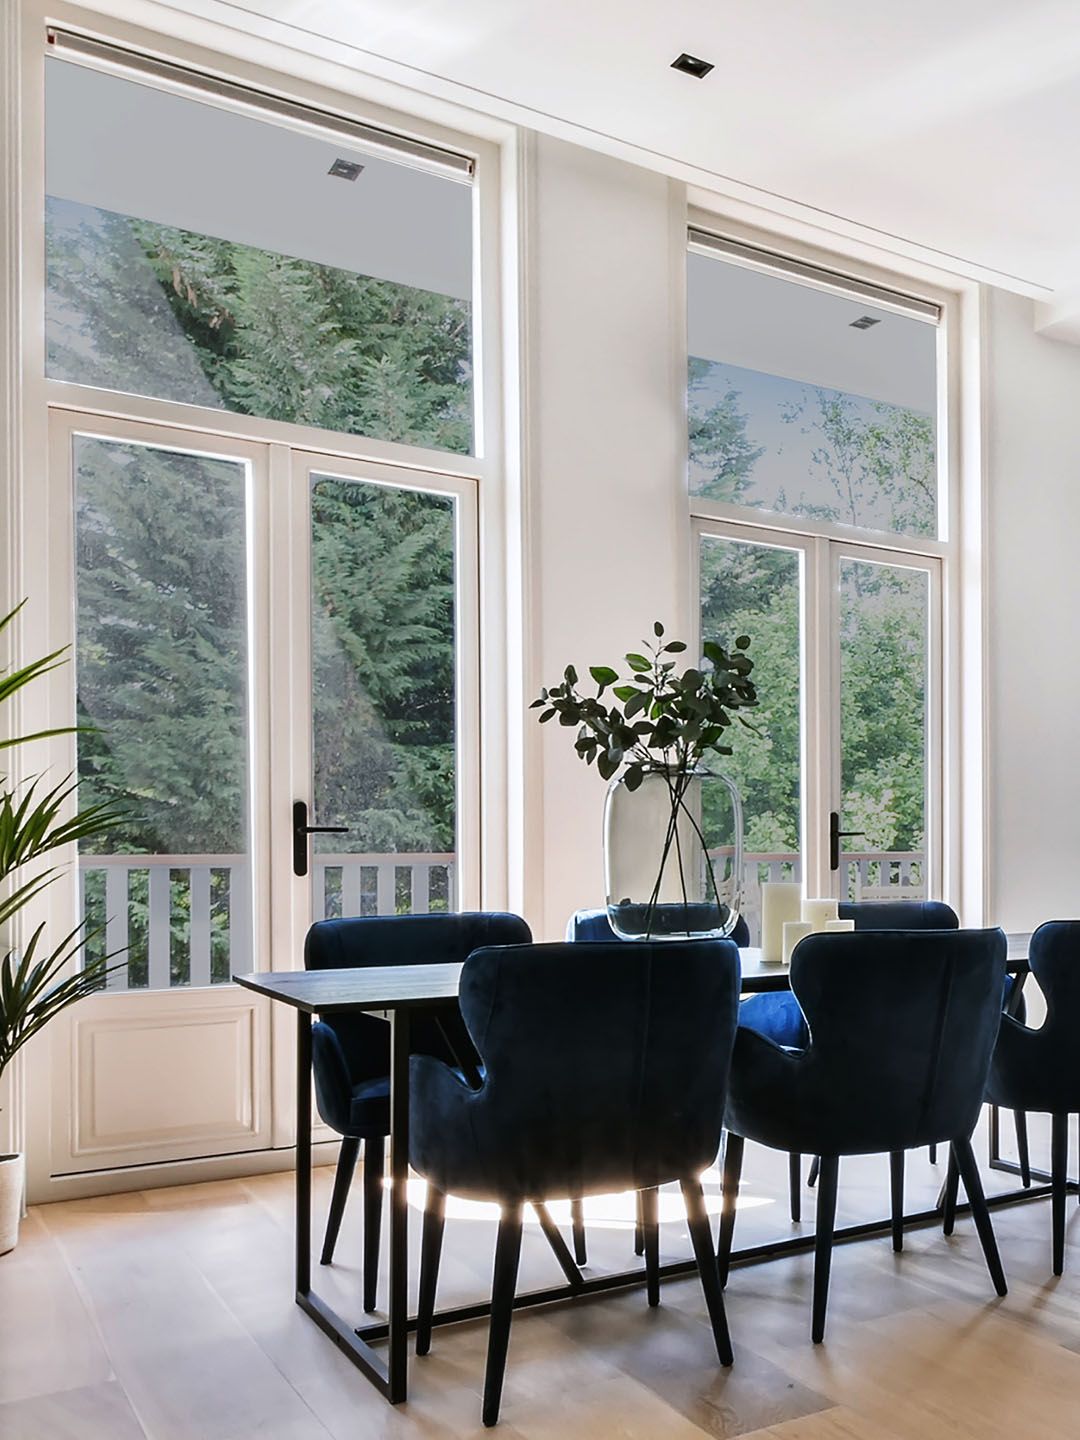 Window film applied to glass panels in a dining room